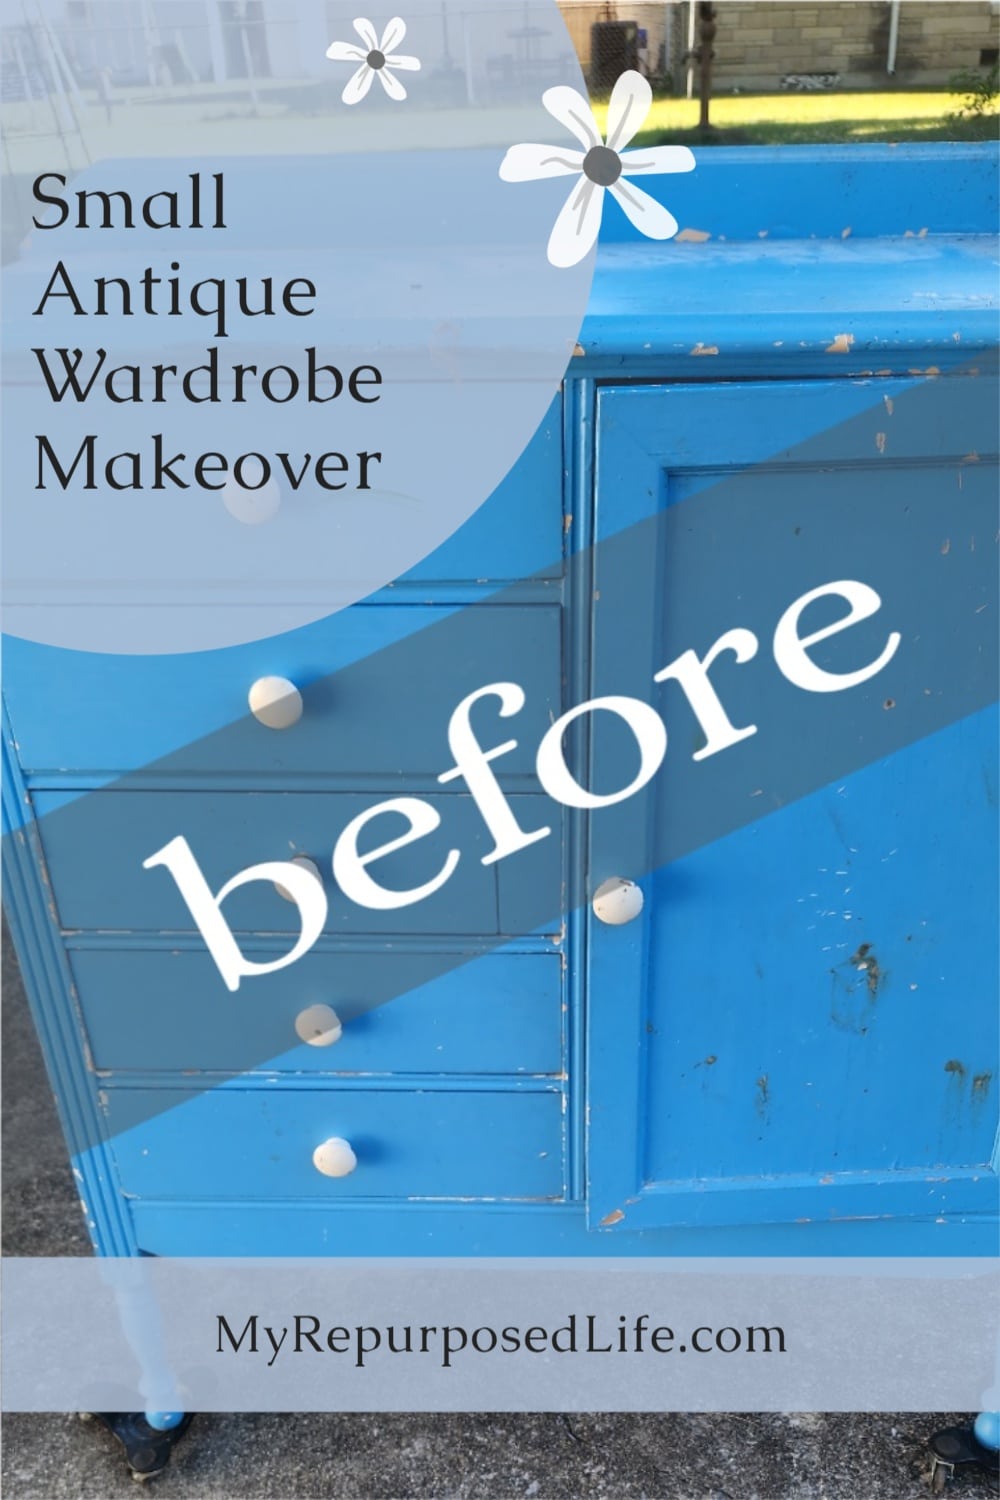 How To Paint An Old Wardrobe: A Quick And Easy Guide. Loaded with lots of tips to do an antique wardrobe makeover with paint and decoupage. #MyRepurposedLife #upcyle #furniture #makeover via @repurposedlife